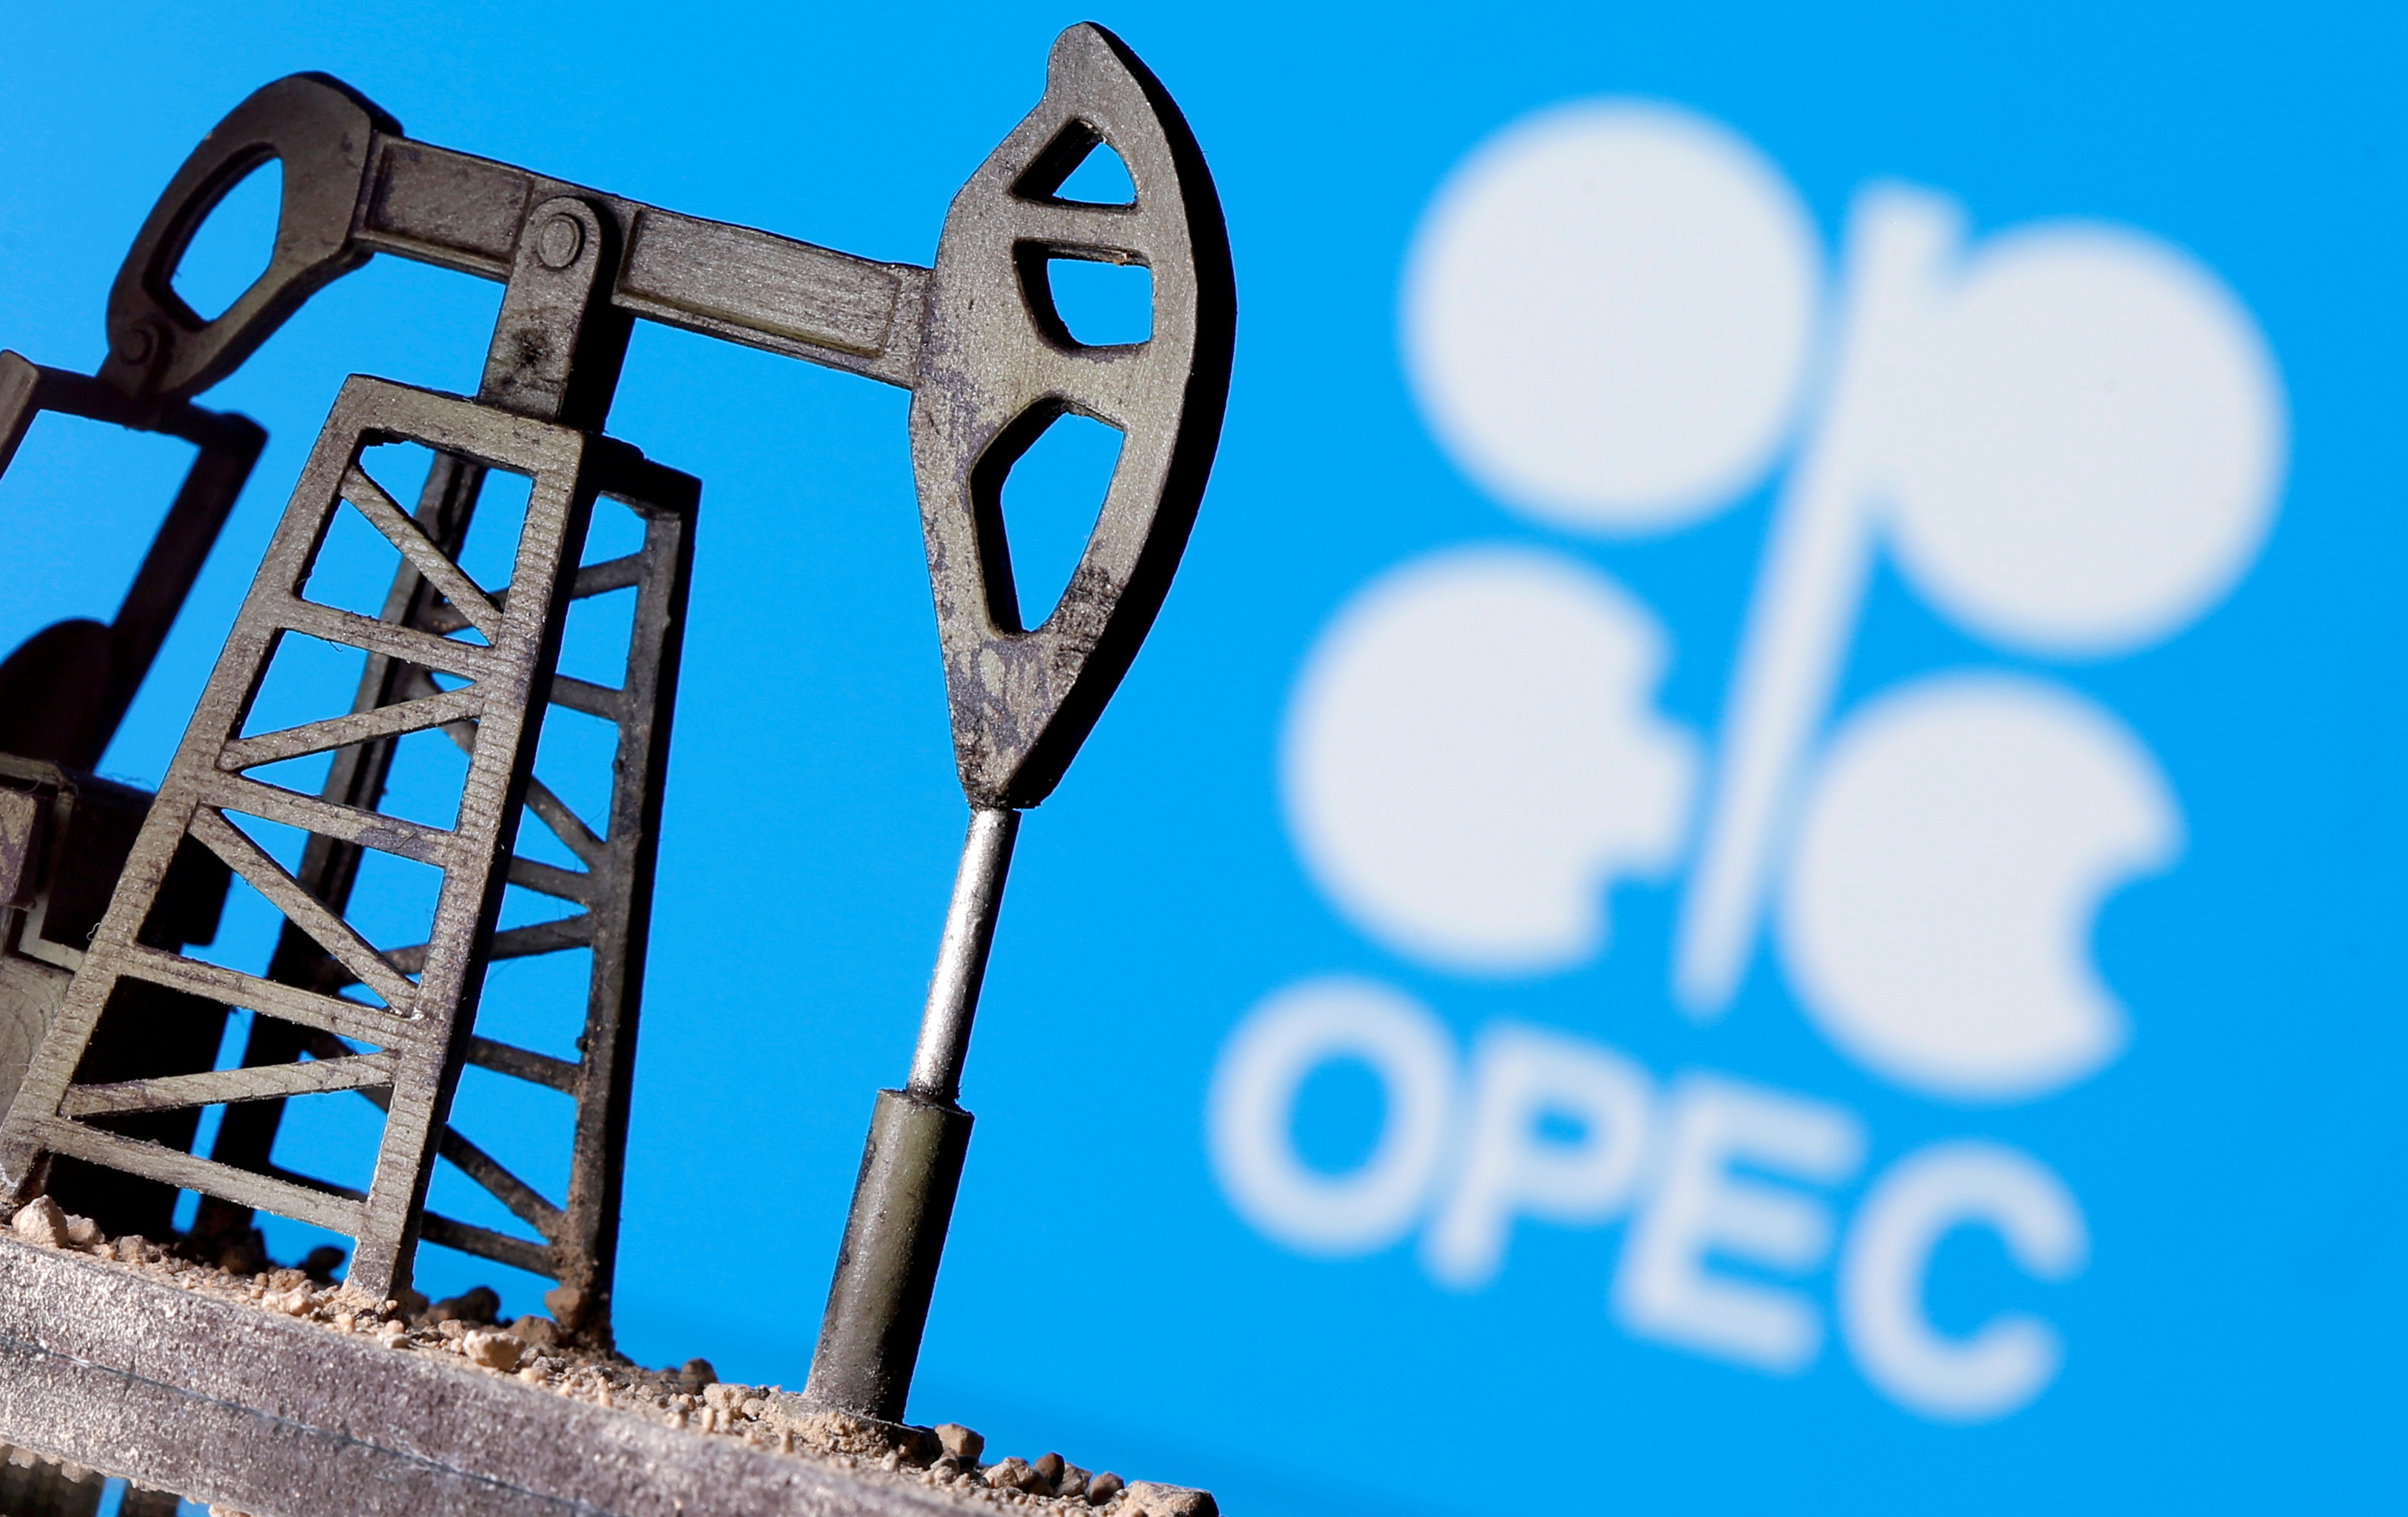 A 3D printed oil pump jack is seen in front of displayed OPEC logo in this illustration picture, April 14, 2020. REUTERS/Dado Ruvic/Illustration/File Photo